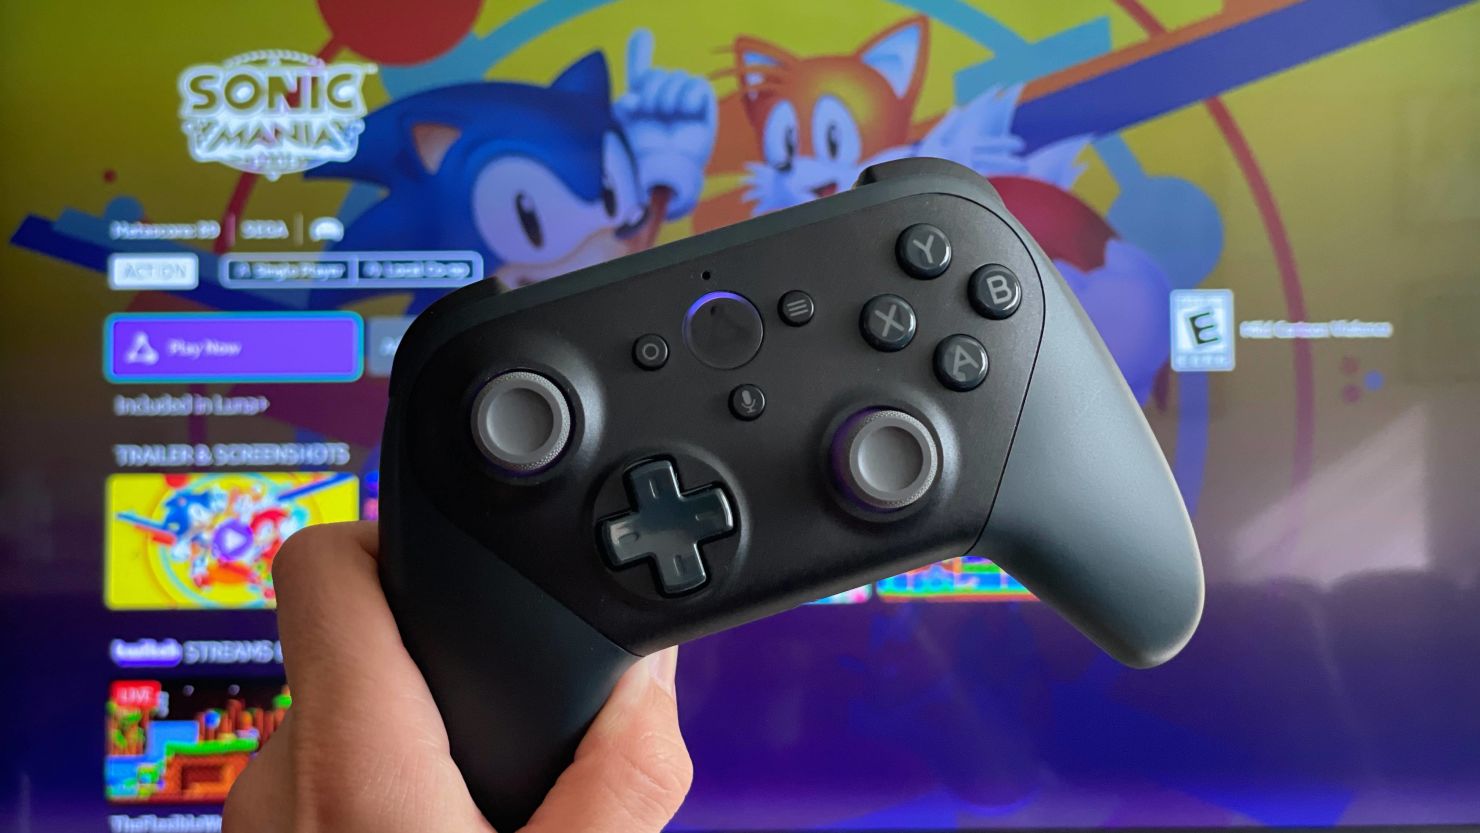 Luna Game Streaming Adds Free Prime Games, Twitch